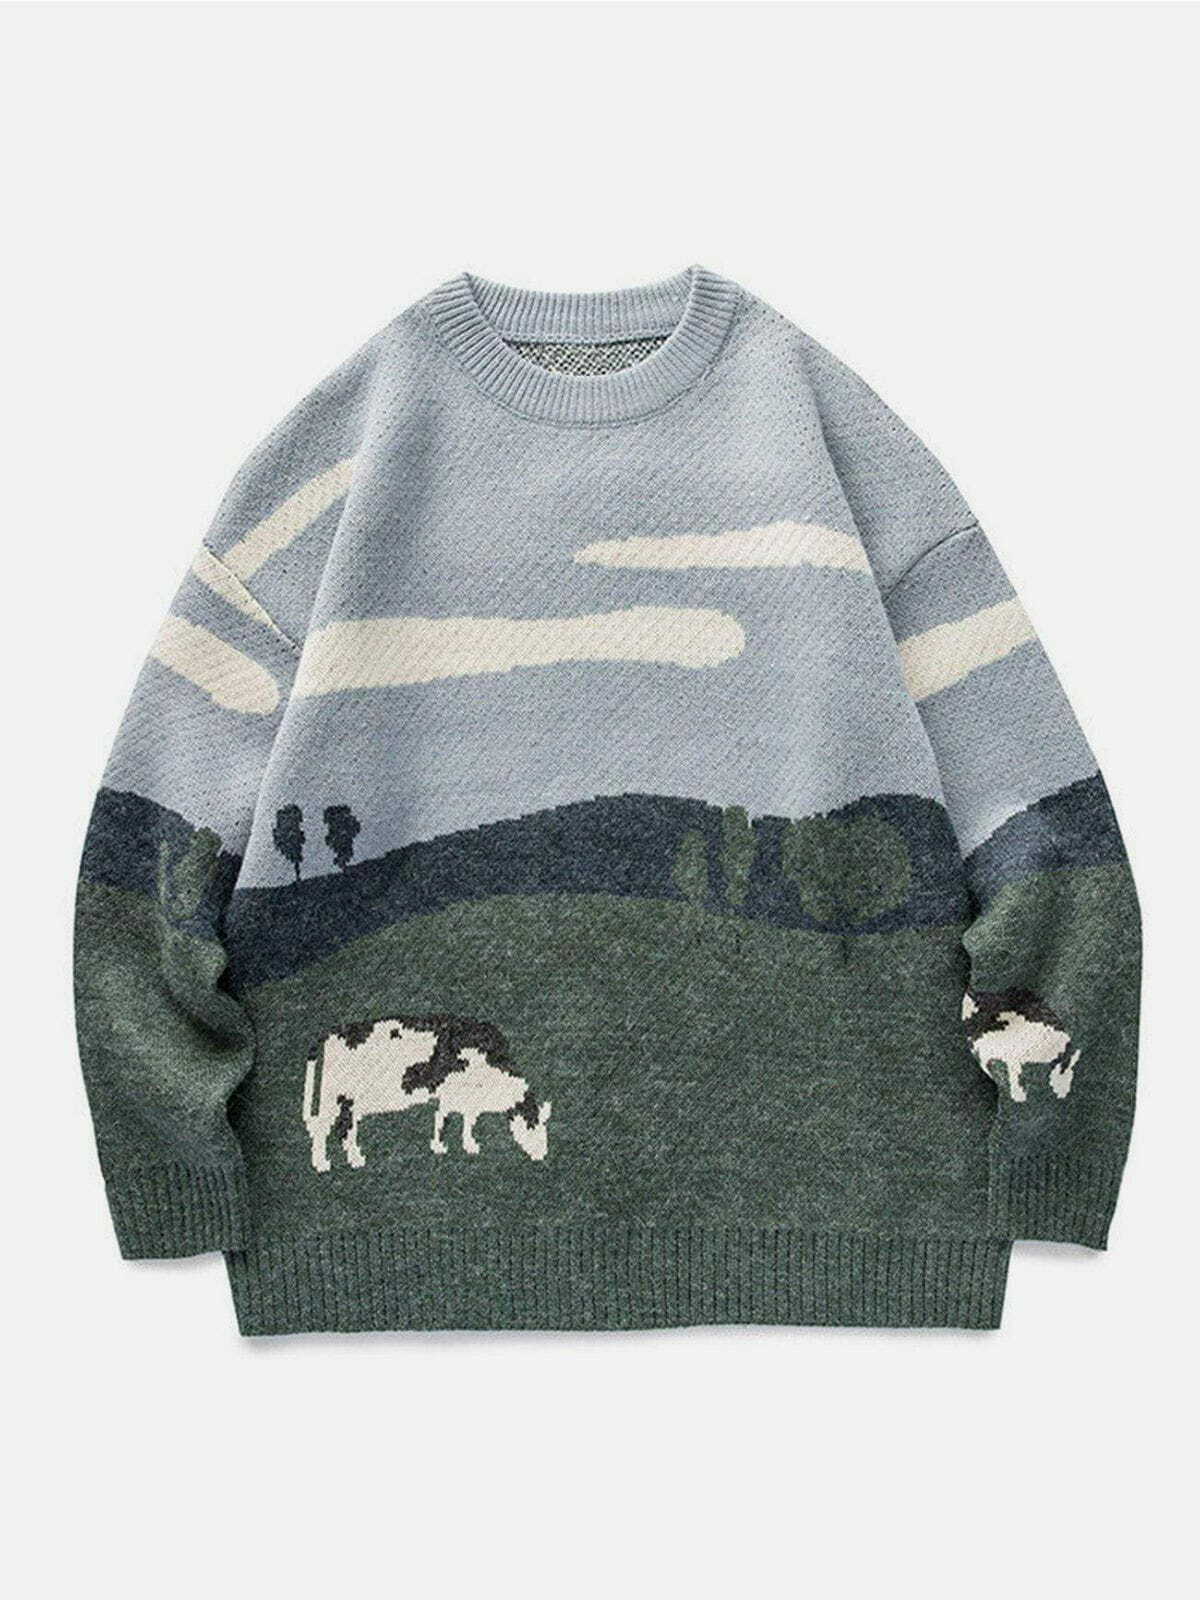 vintage cow print sweater   chic & youthful aesthetic 5522